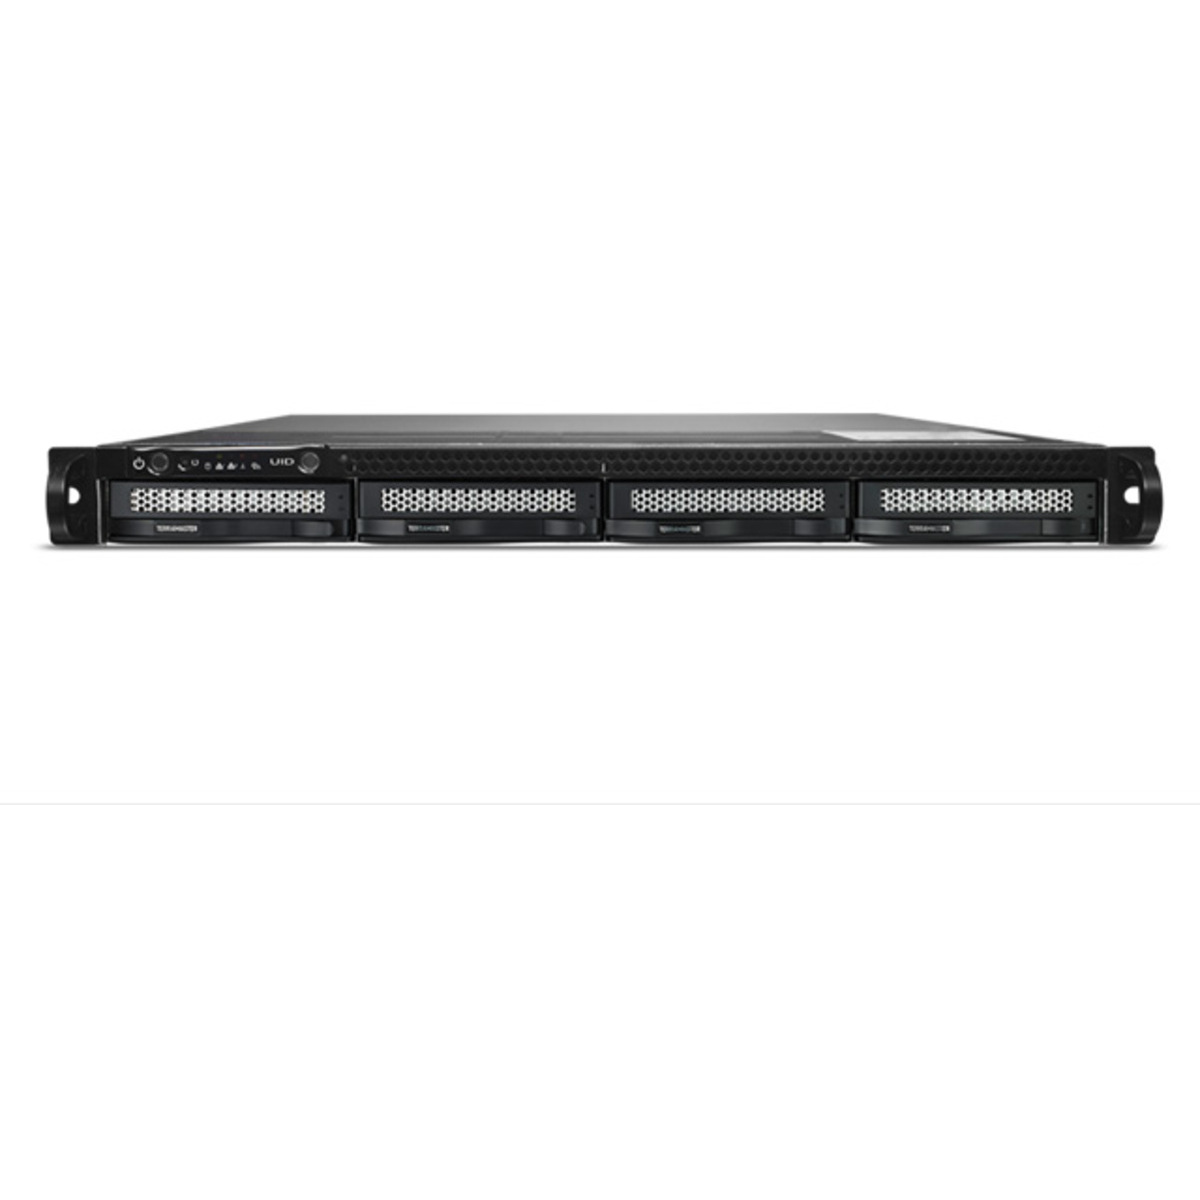 TerraMaster U4-111 16tb 4-Bay RackMount Multimedia / Power User / Business NAS - Network Attached Storage Device 4x4tb Crucial MX500 CT4000MX500SSD1 2.5 560/510MB/s SATA 6Gb/s SSD CONSUMER Class Drives Installed - Burn-In Tested U4-111